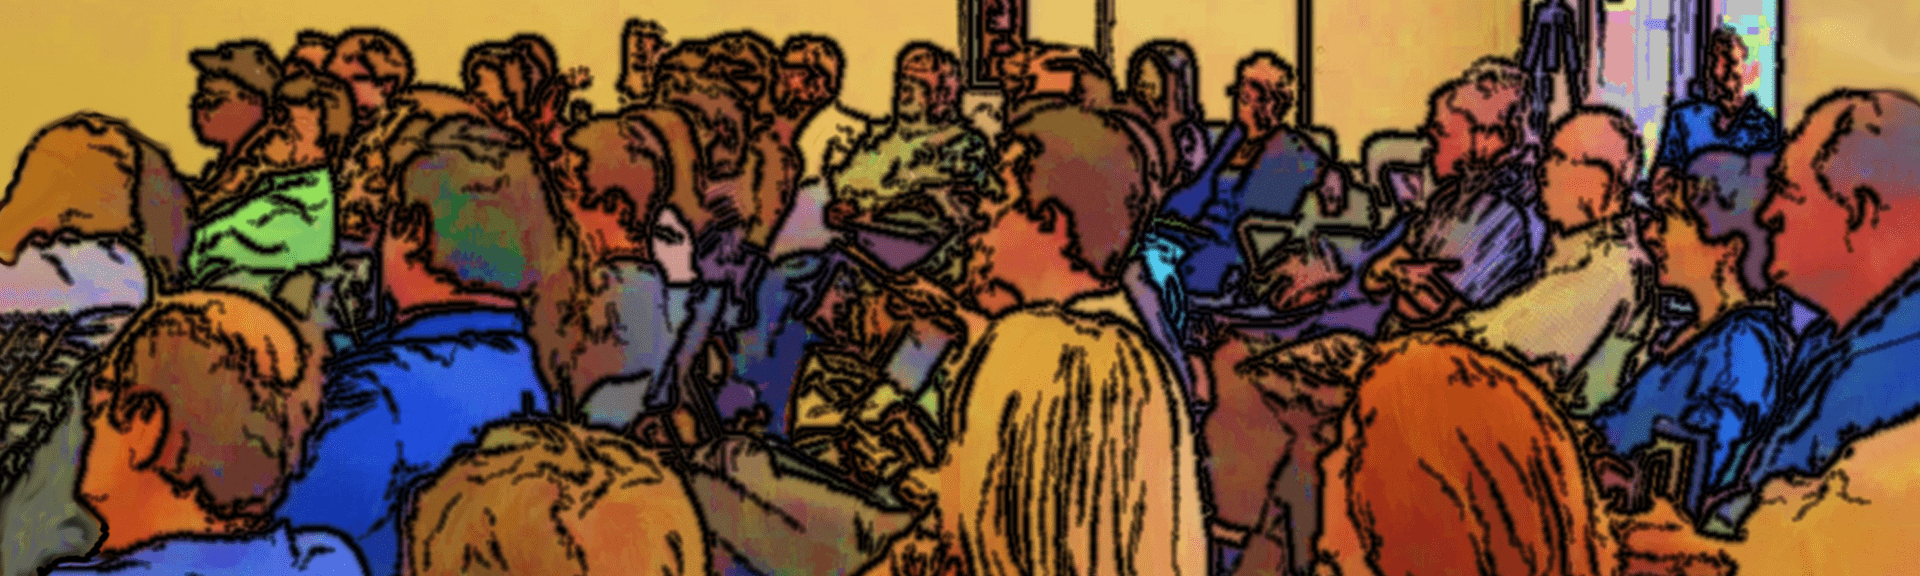 color painting of seated audience from side view, public domain